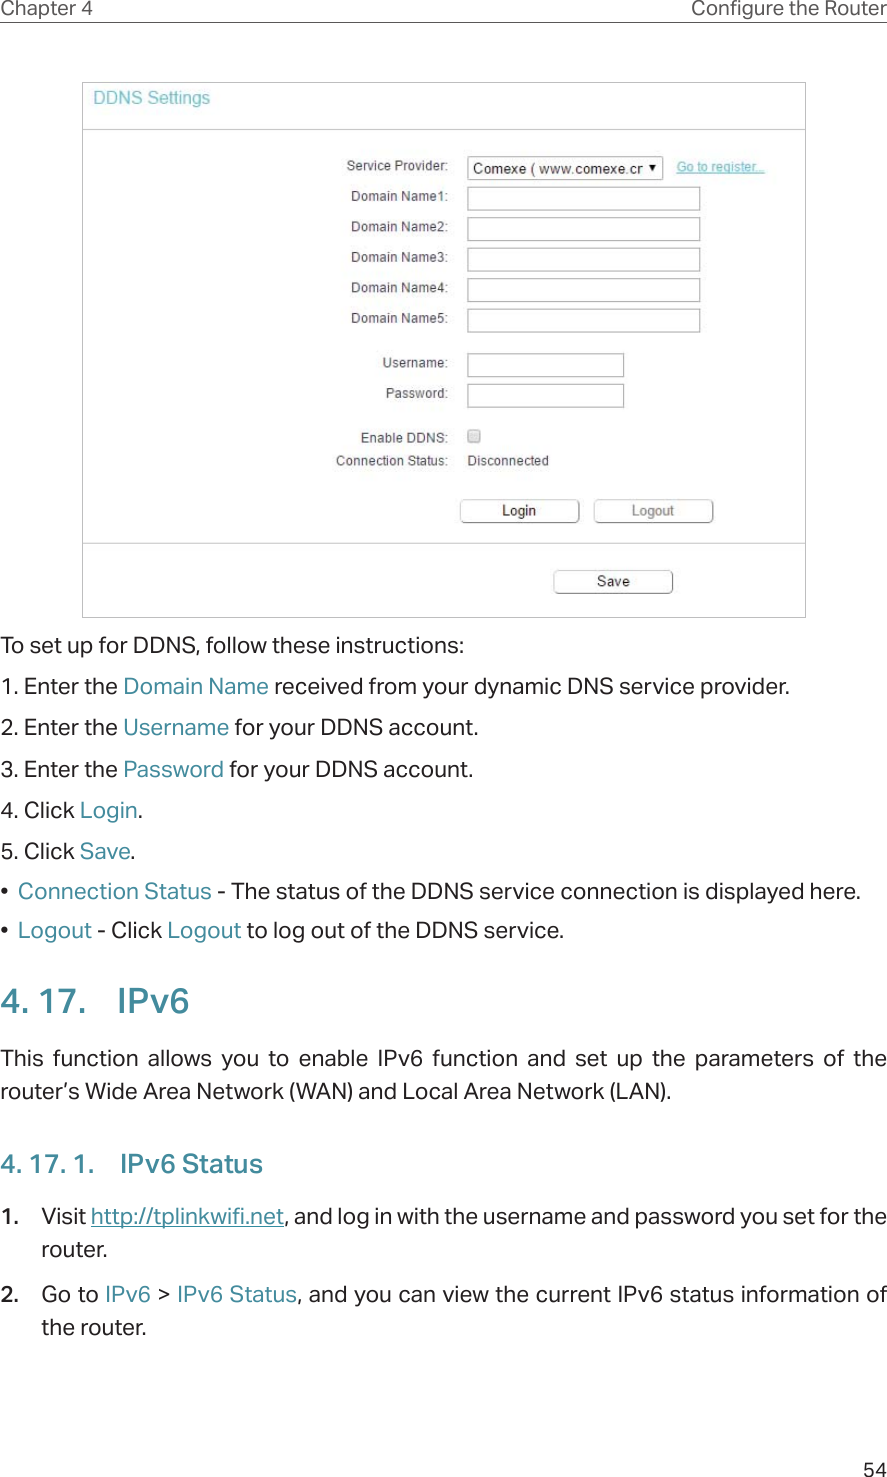 54Chapter 4 &amp;RQƮJXUHWKH5RXWHUTo set up for DDNS, follow these instructions:1. Enter the Domain Name received from your dynamic DNS service provider.  2. Enter the Username for your DDNS account. 3. Enter the Password for your DDNS account. 4. Click Login.5. Click Save.•  Connection Status - The status of the DDNS service connection is displayed here.•  Logout - Click Logout to log out of the DDNS service. 4. 17.  IPv6This function allows you to enable IPv6 function and set up the parameters of the router’s Wide Area Network (WAN) and Local Area Network (LAN).4. 17. 1.  IPv6 Status1.  Visit http://tplinkwifi.net, and log in with the username and password you set for the router.2.  Go to IPv6 &gt; IPv6 Status, and you can view the current IPv6 status information of the router.